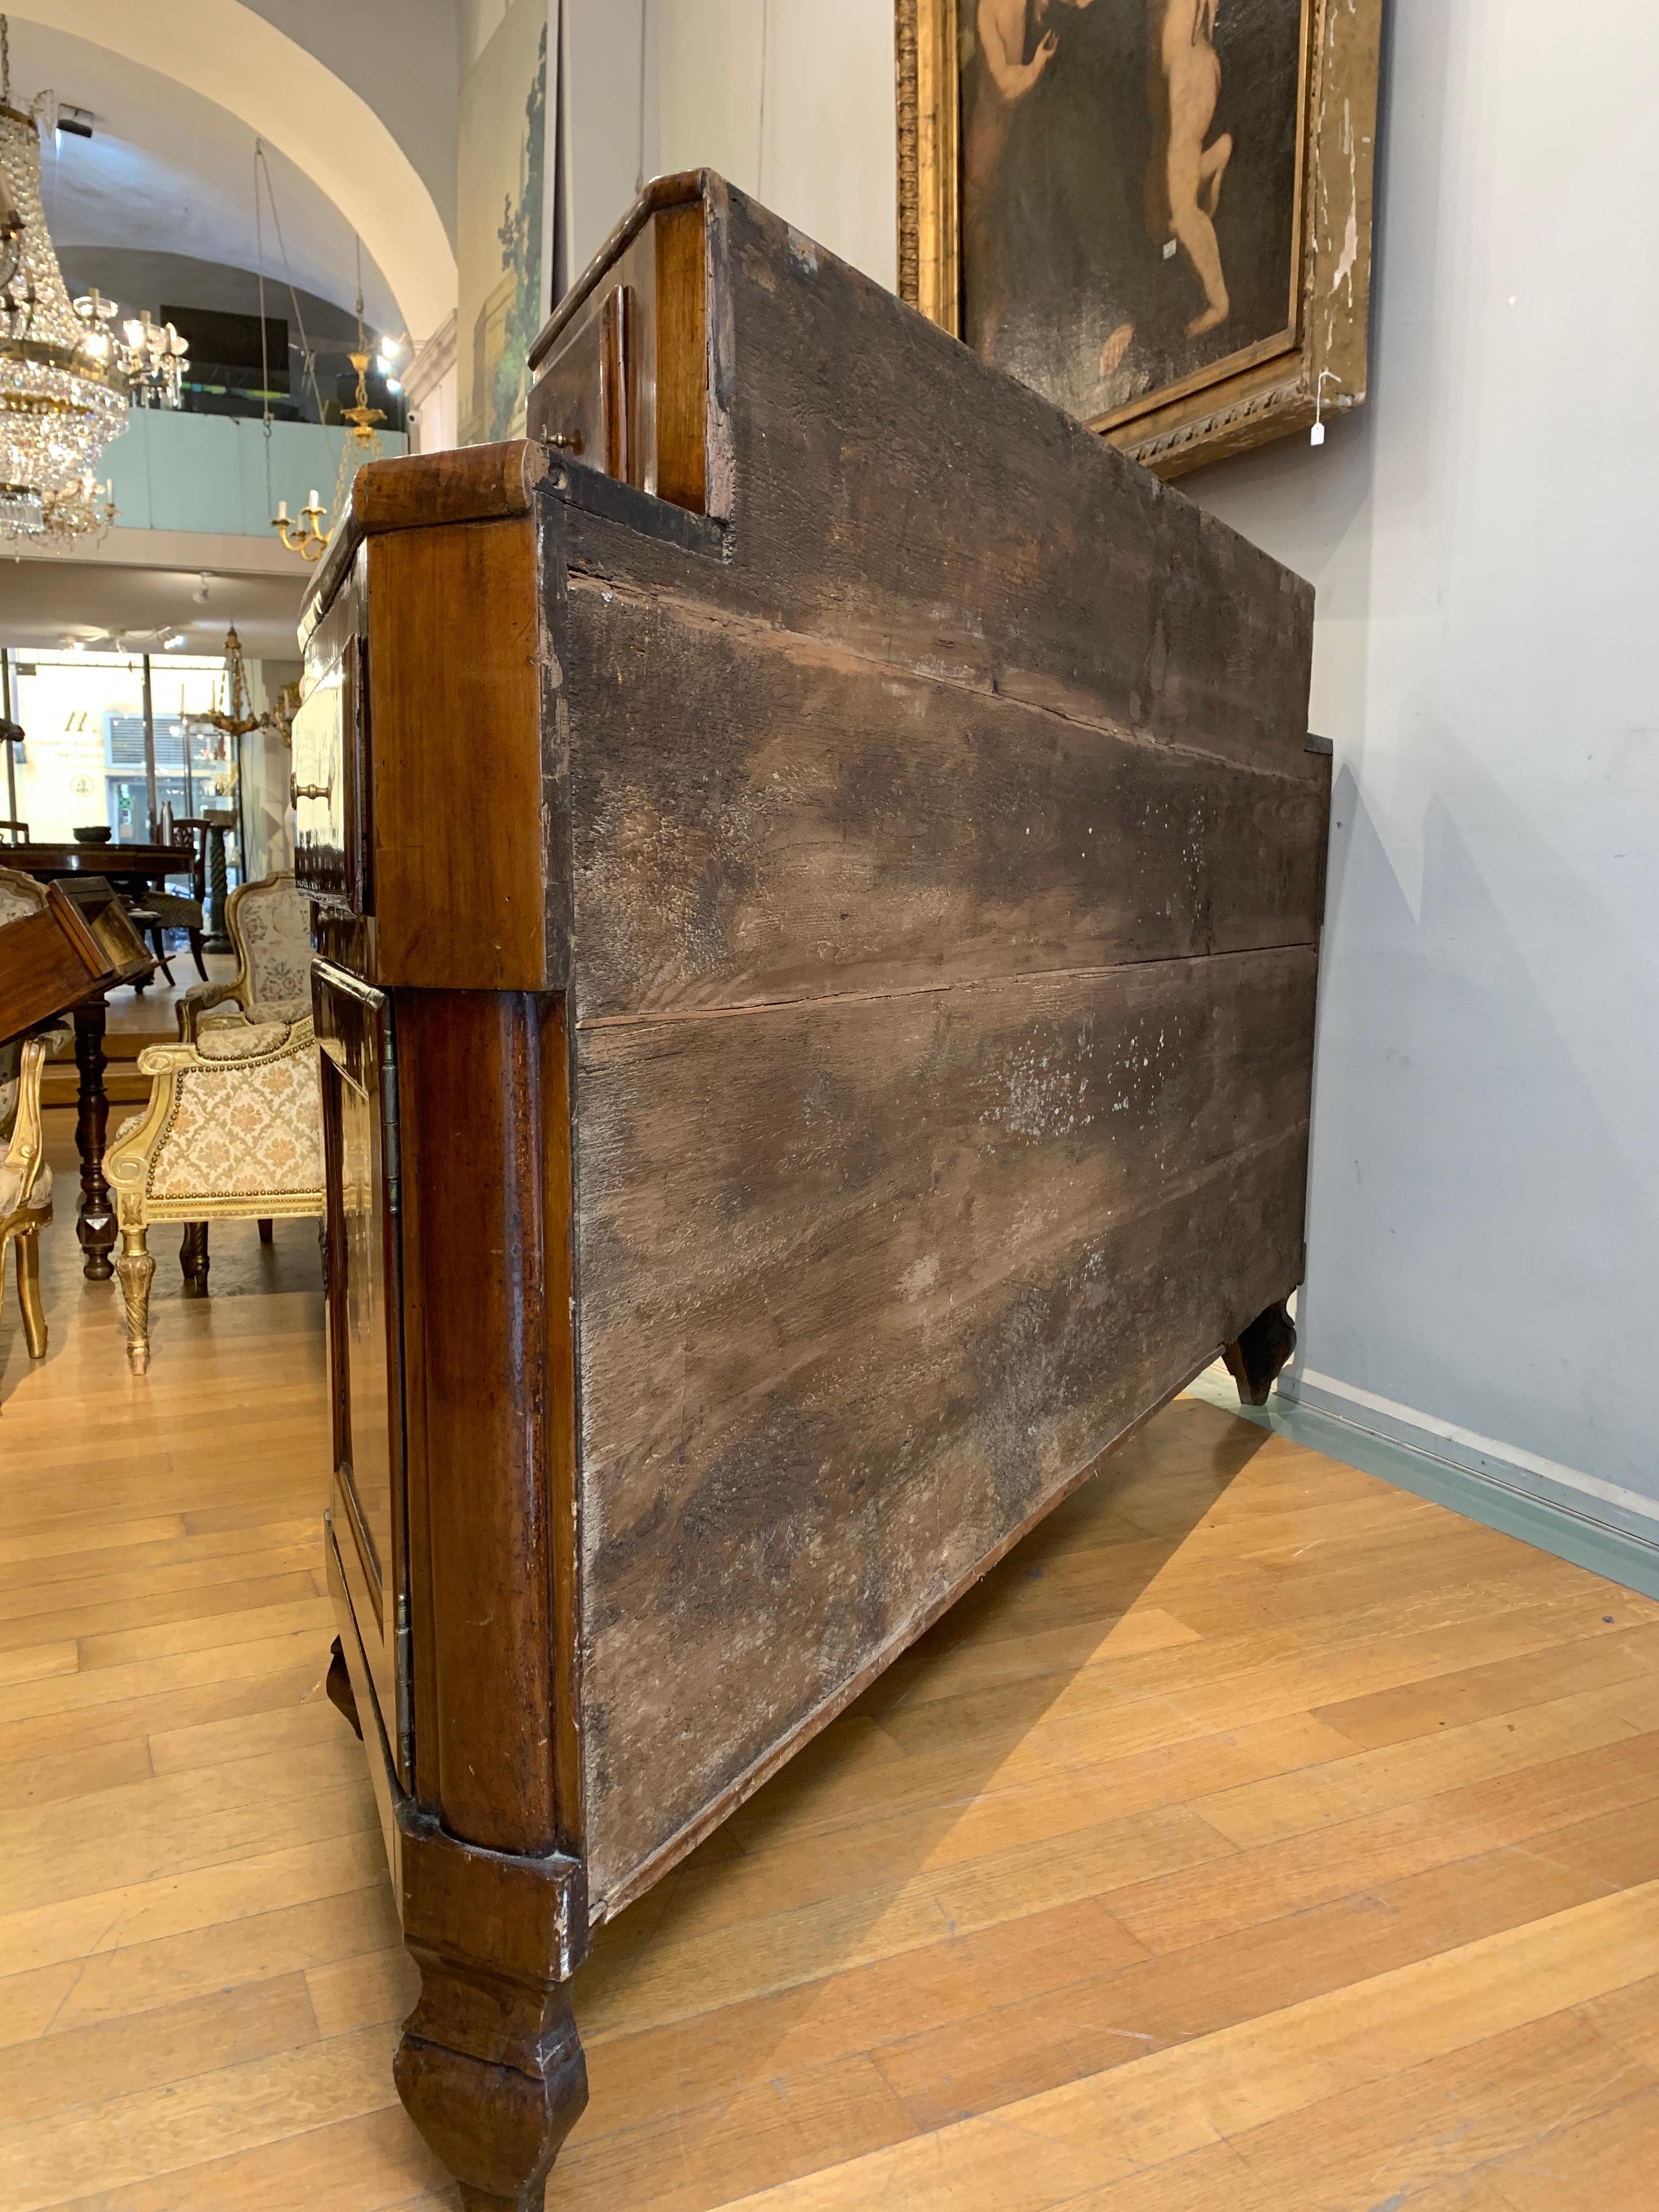 END OF THE 18th CENTURY NOTCHED SIDEBOARD In Good Condition For Sale In Firenze, FI